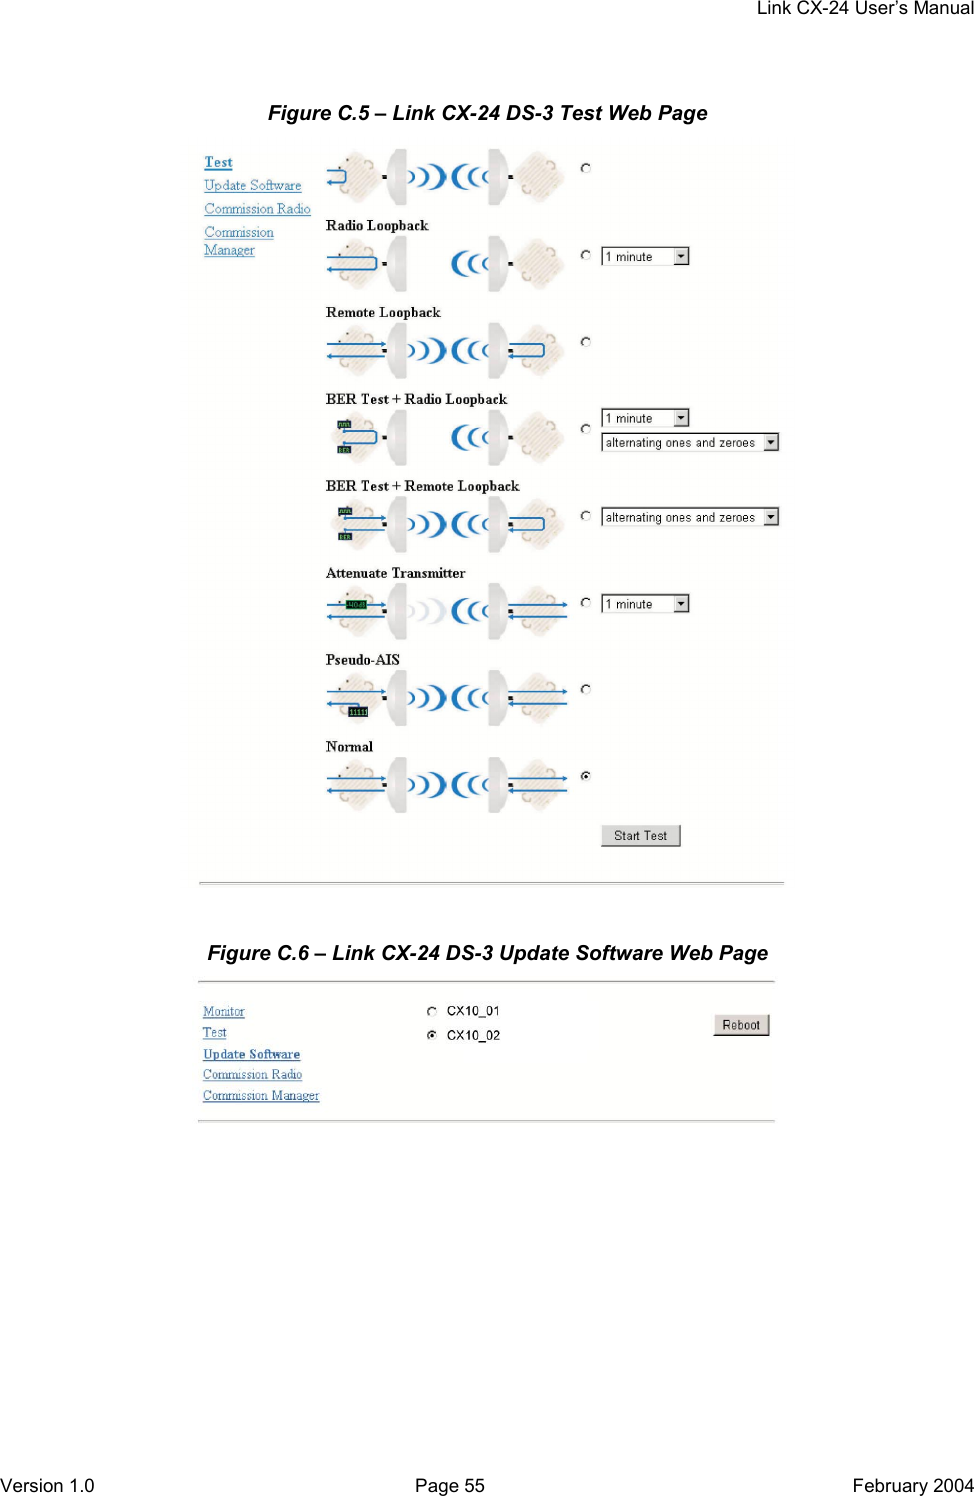     Link CX-24 User’s Manual Version 1.0  Page 55  February 2004 Figure C.5 – Link CX-24 DS-3 Test Web Page   Figure C.6 – Link CX-24 DS-3 Update Software Web Page  